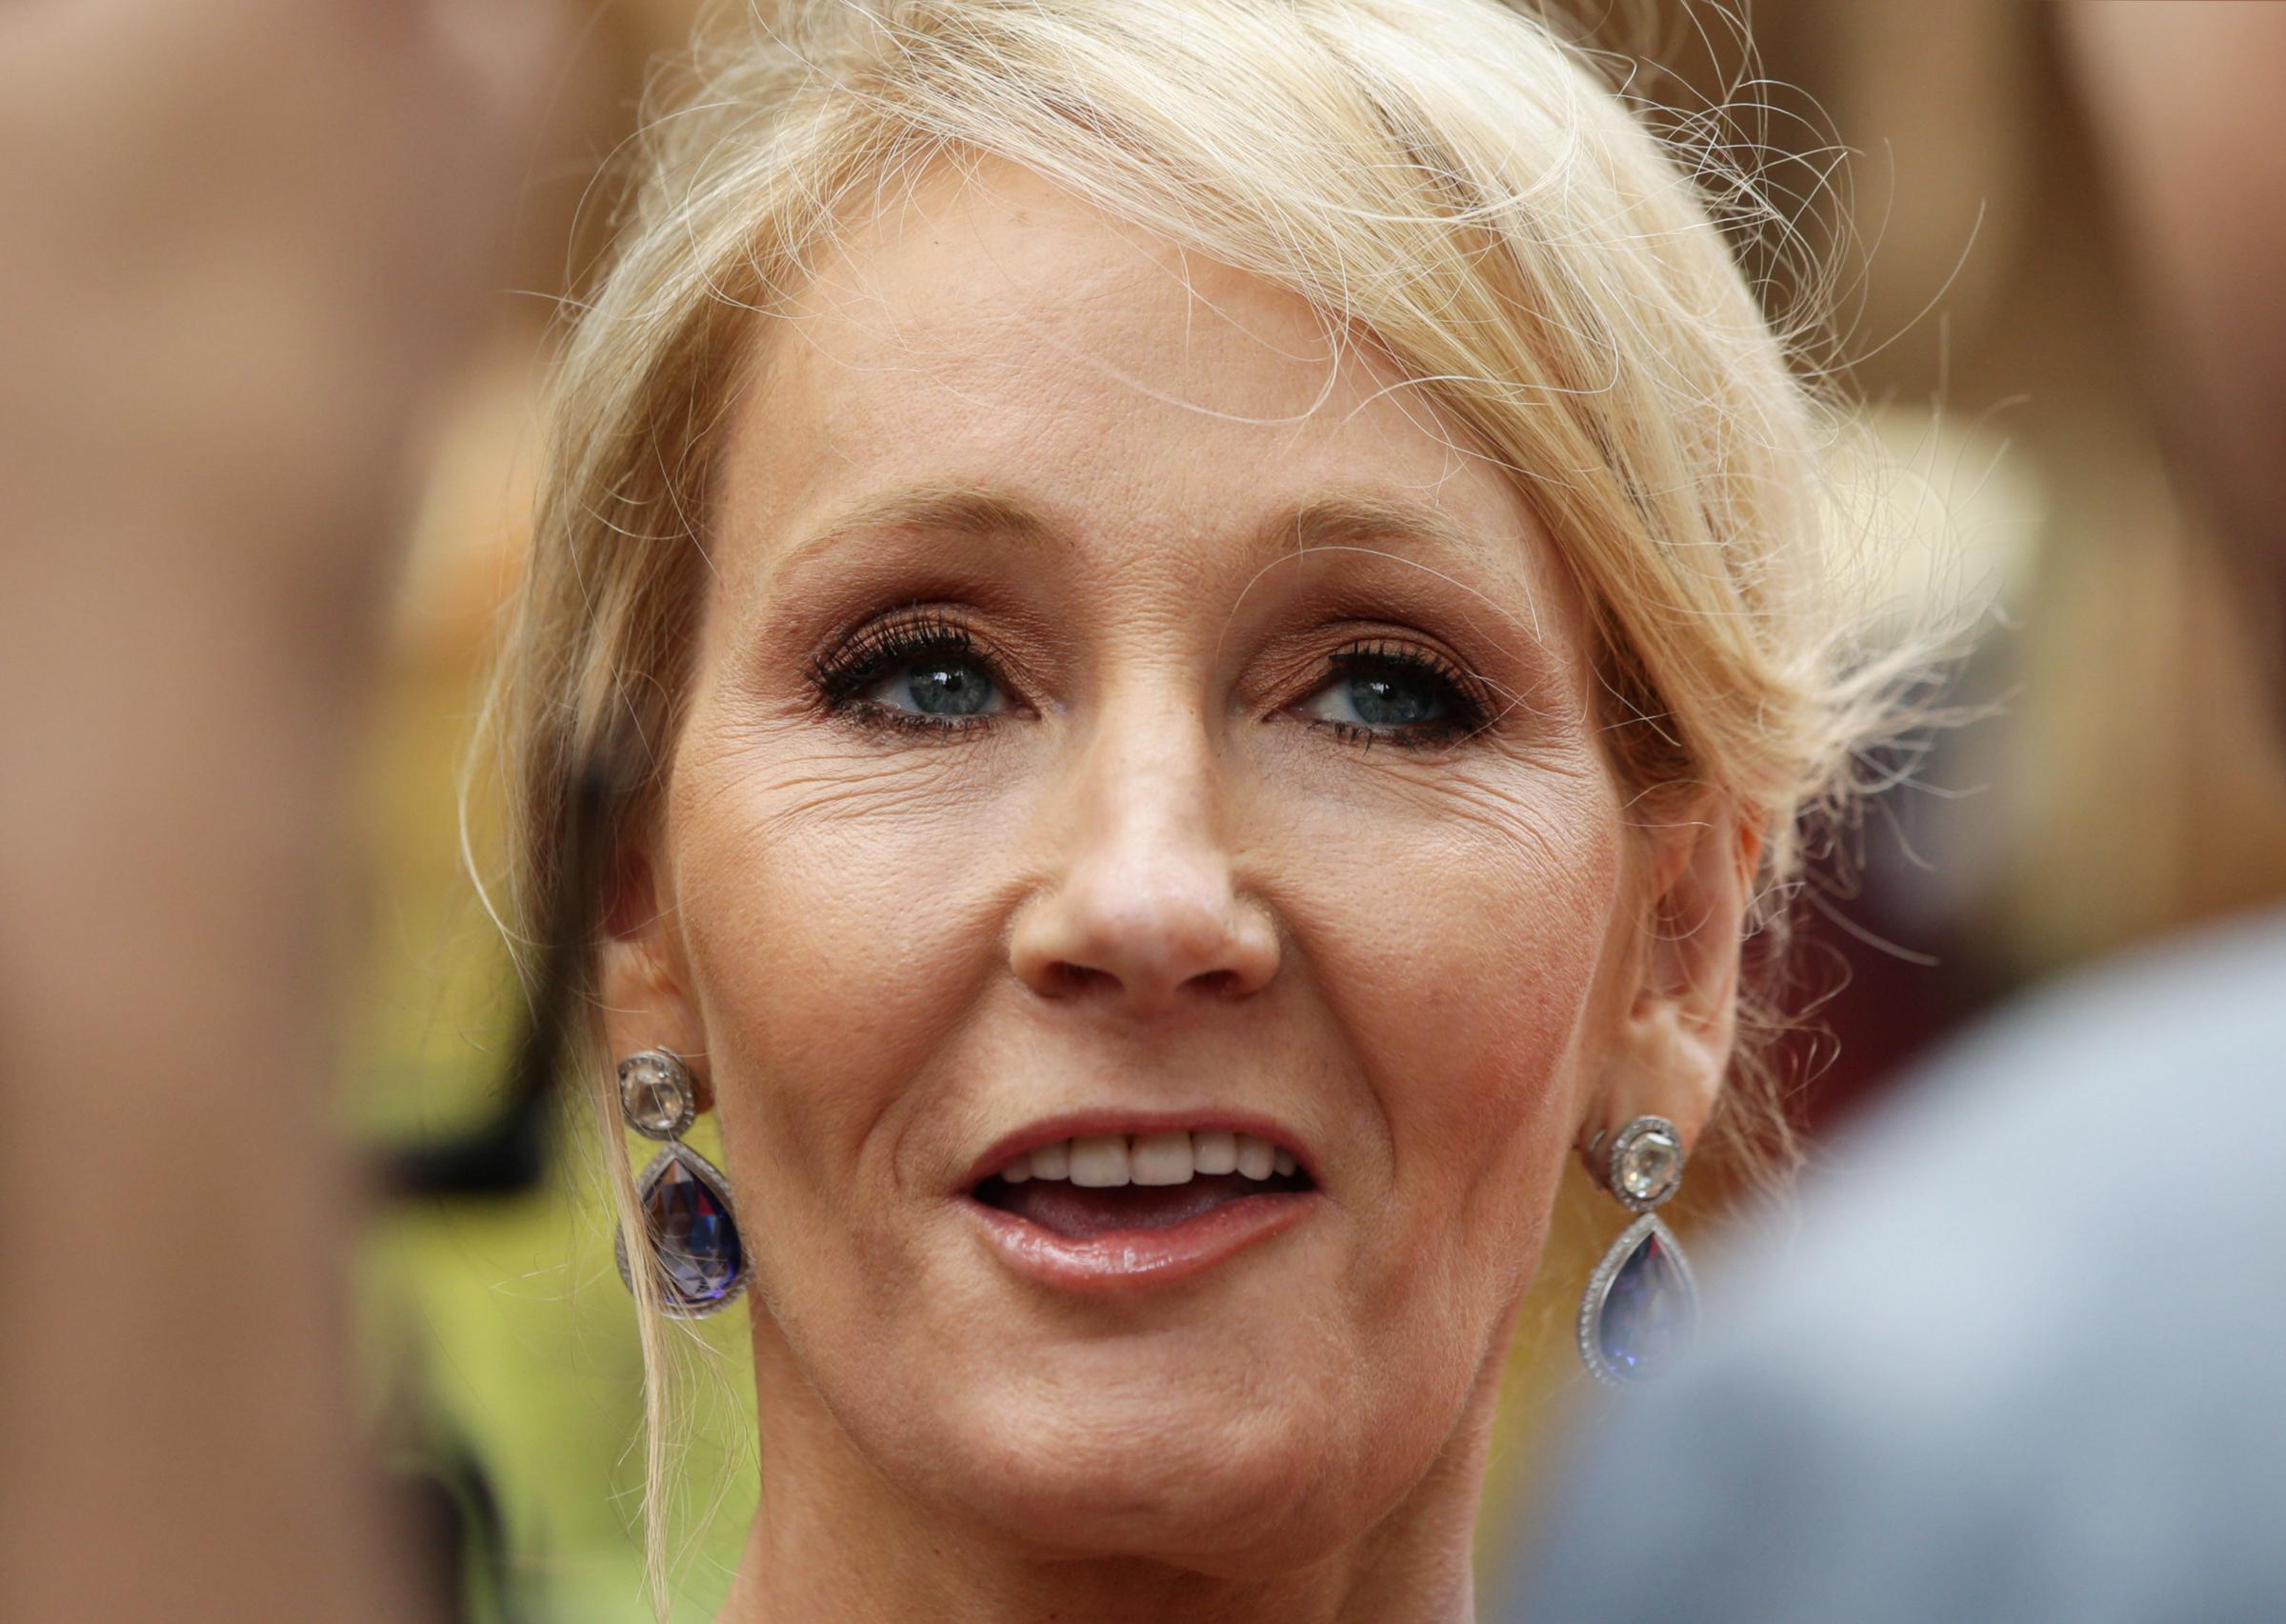 JK Rowling working with police after Rushdie tweet threat